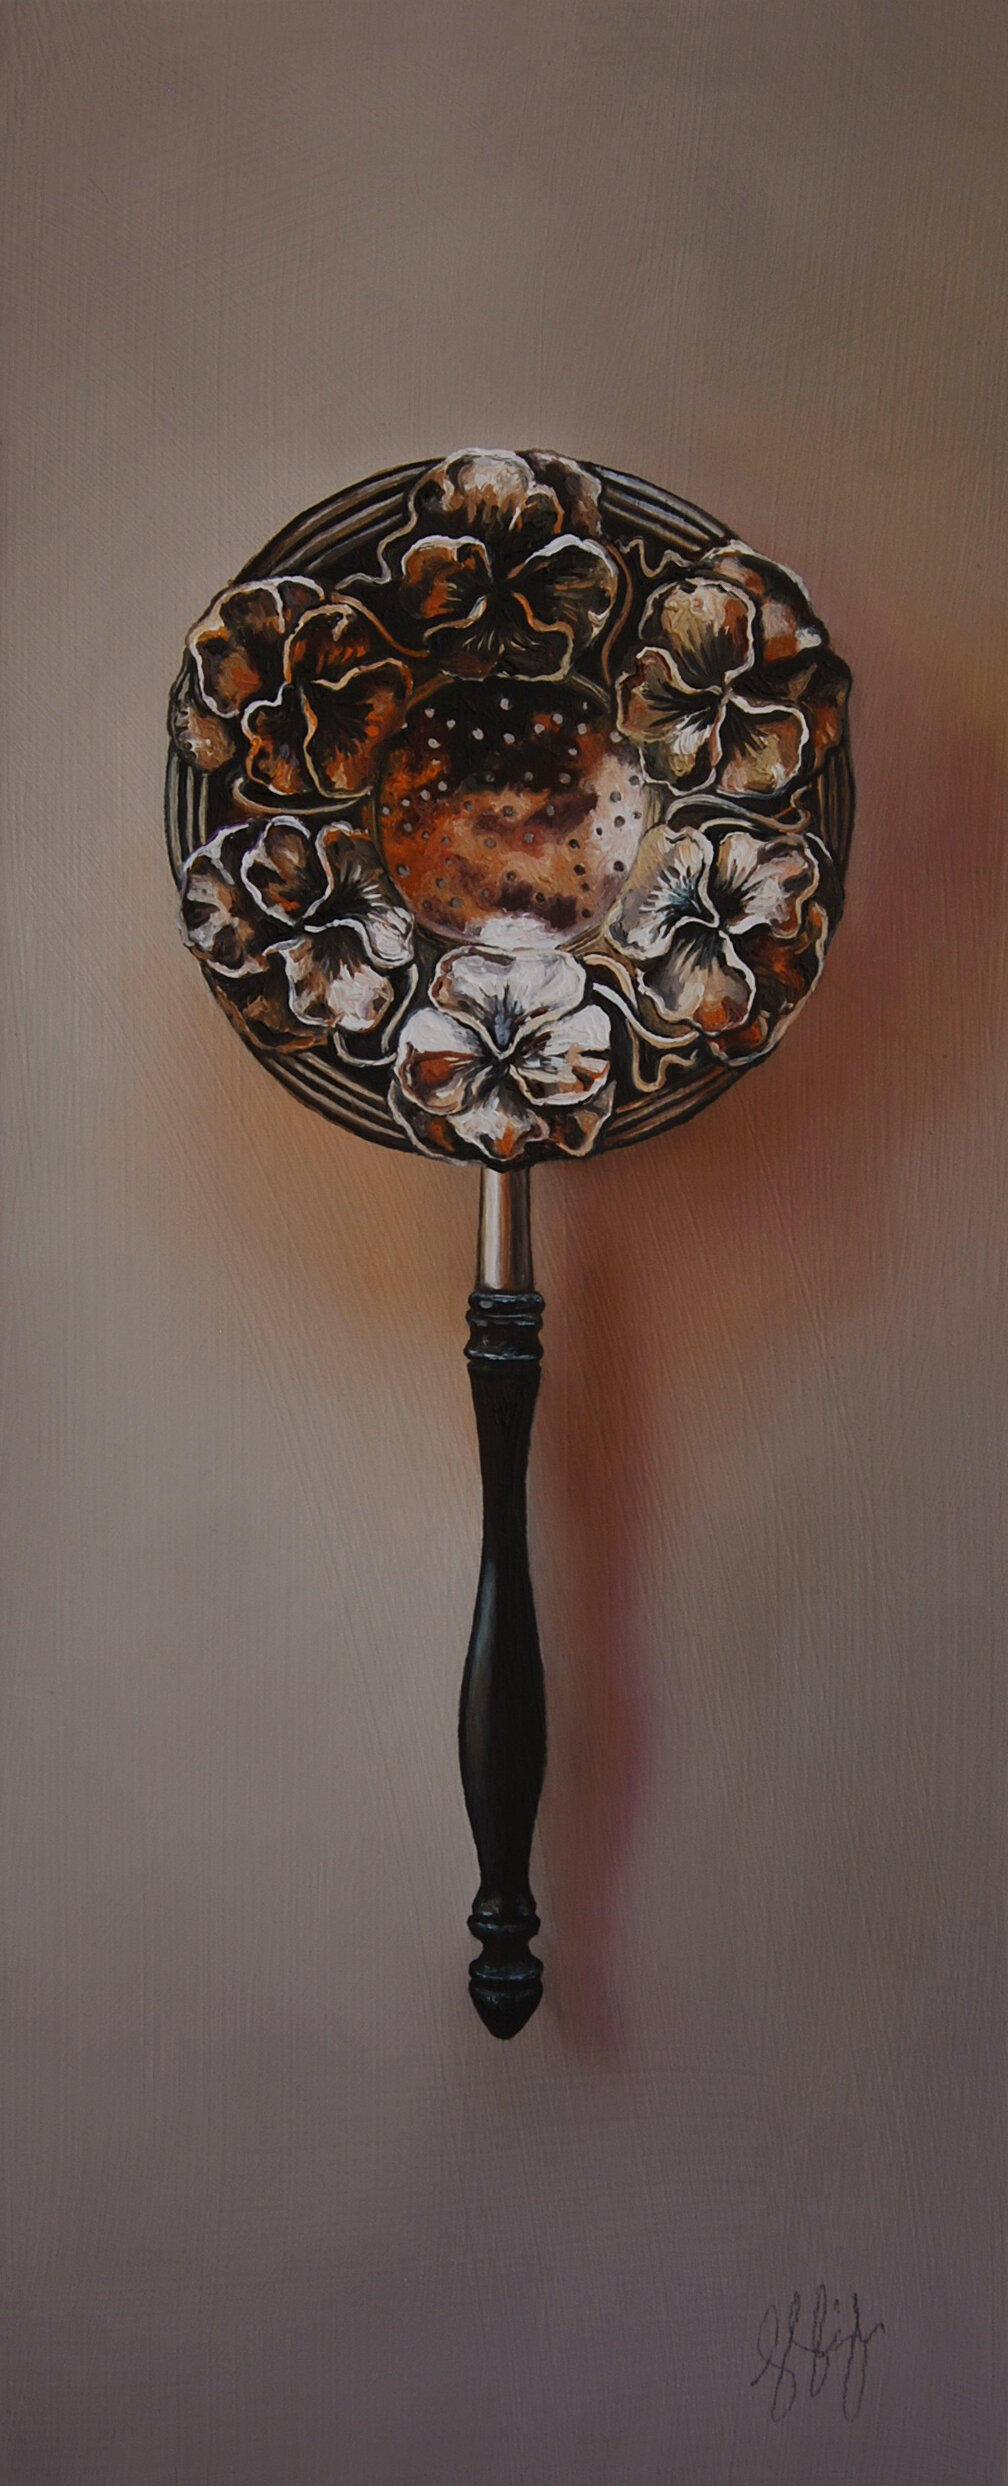   Silver Spoon #140, The Wallower  Oil on panel, 2018. 12x5” 